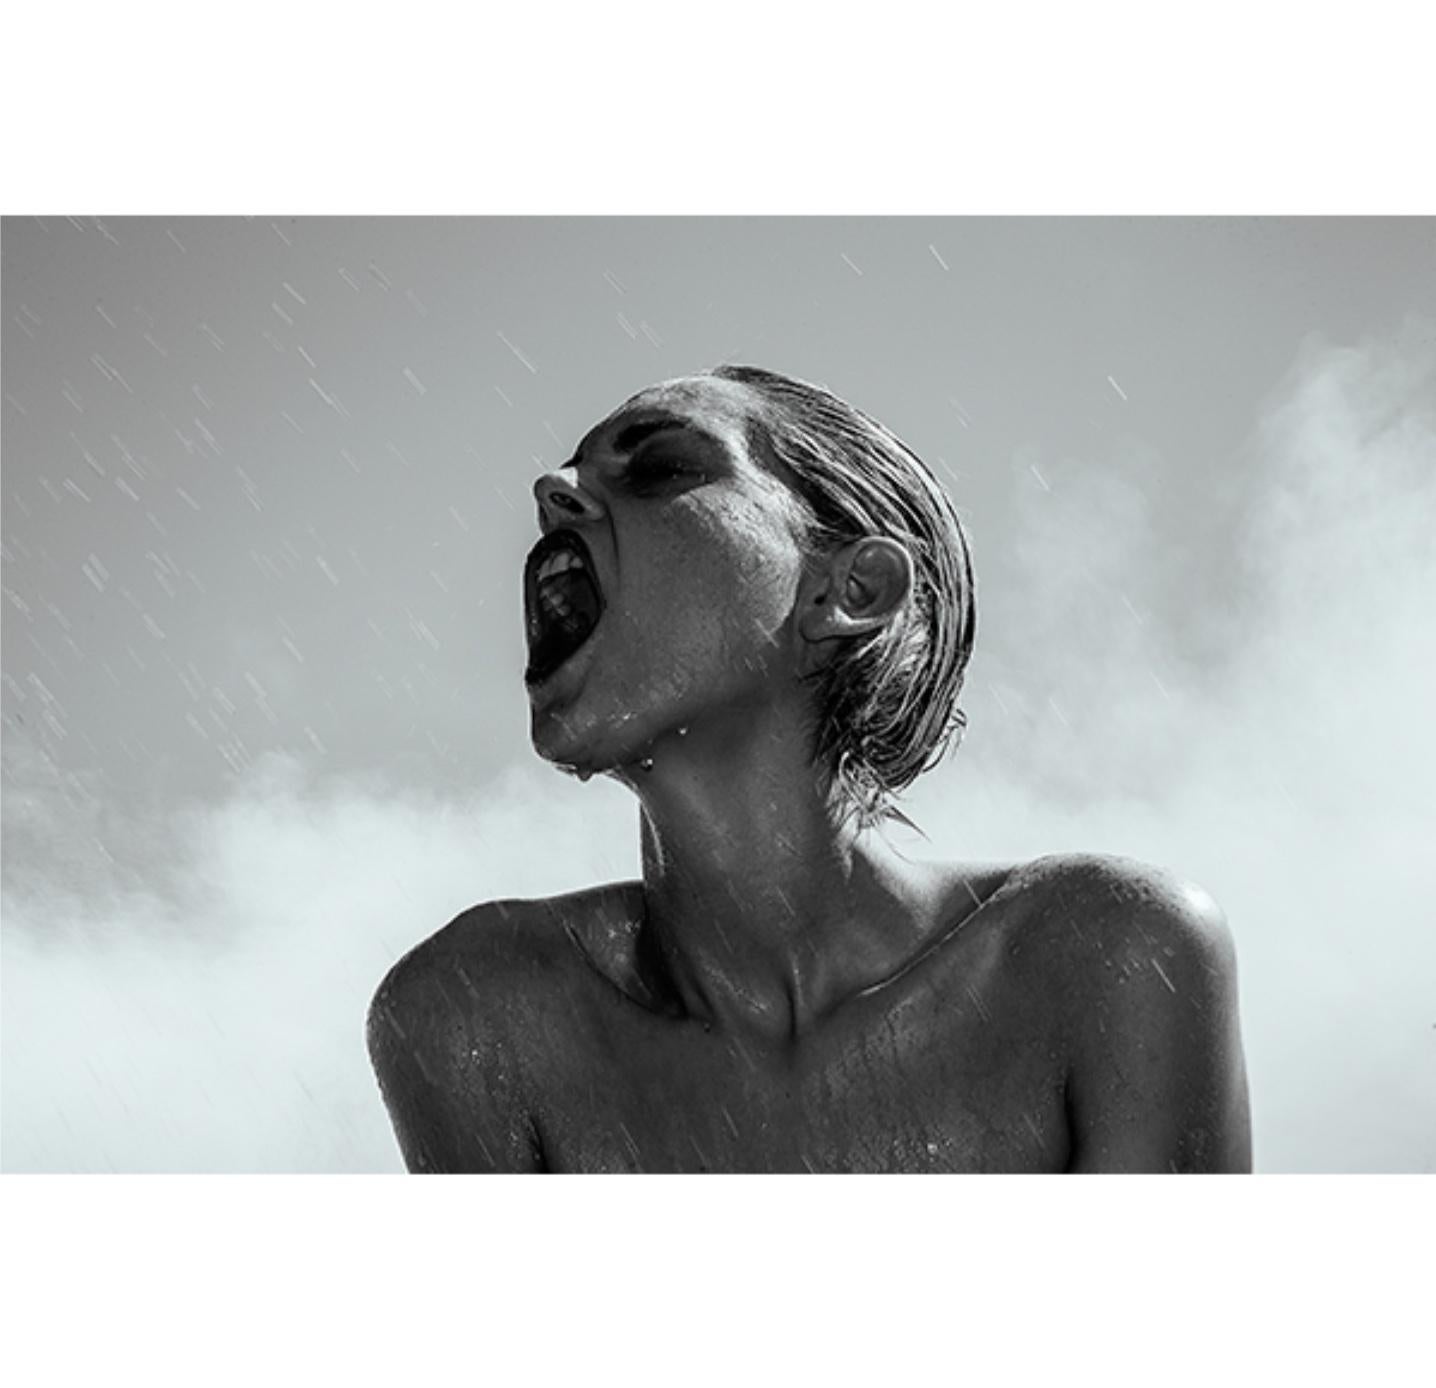 Tyler Shields Black and White Photograph - Pouring Rain (30" x 40")